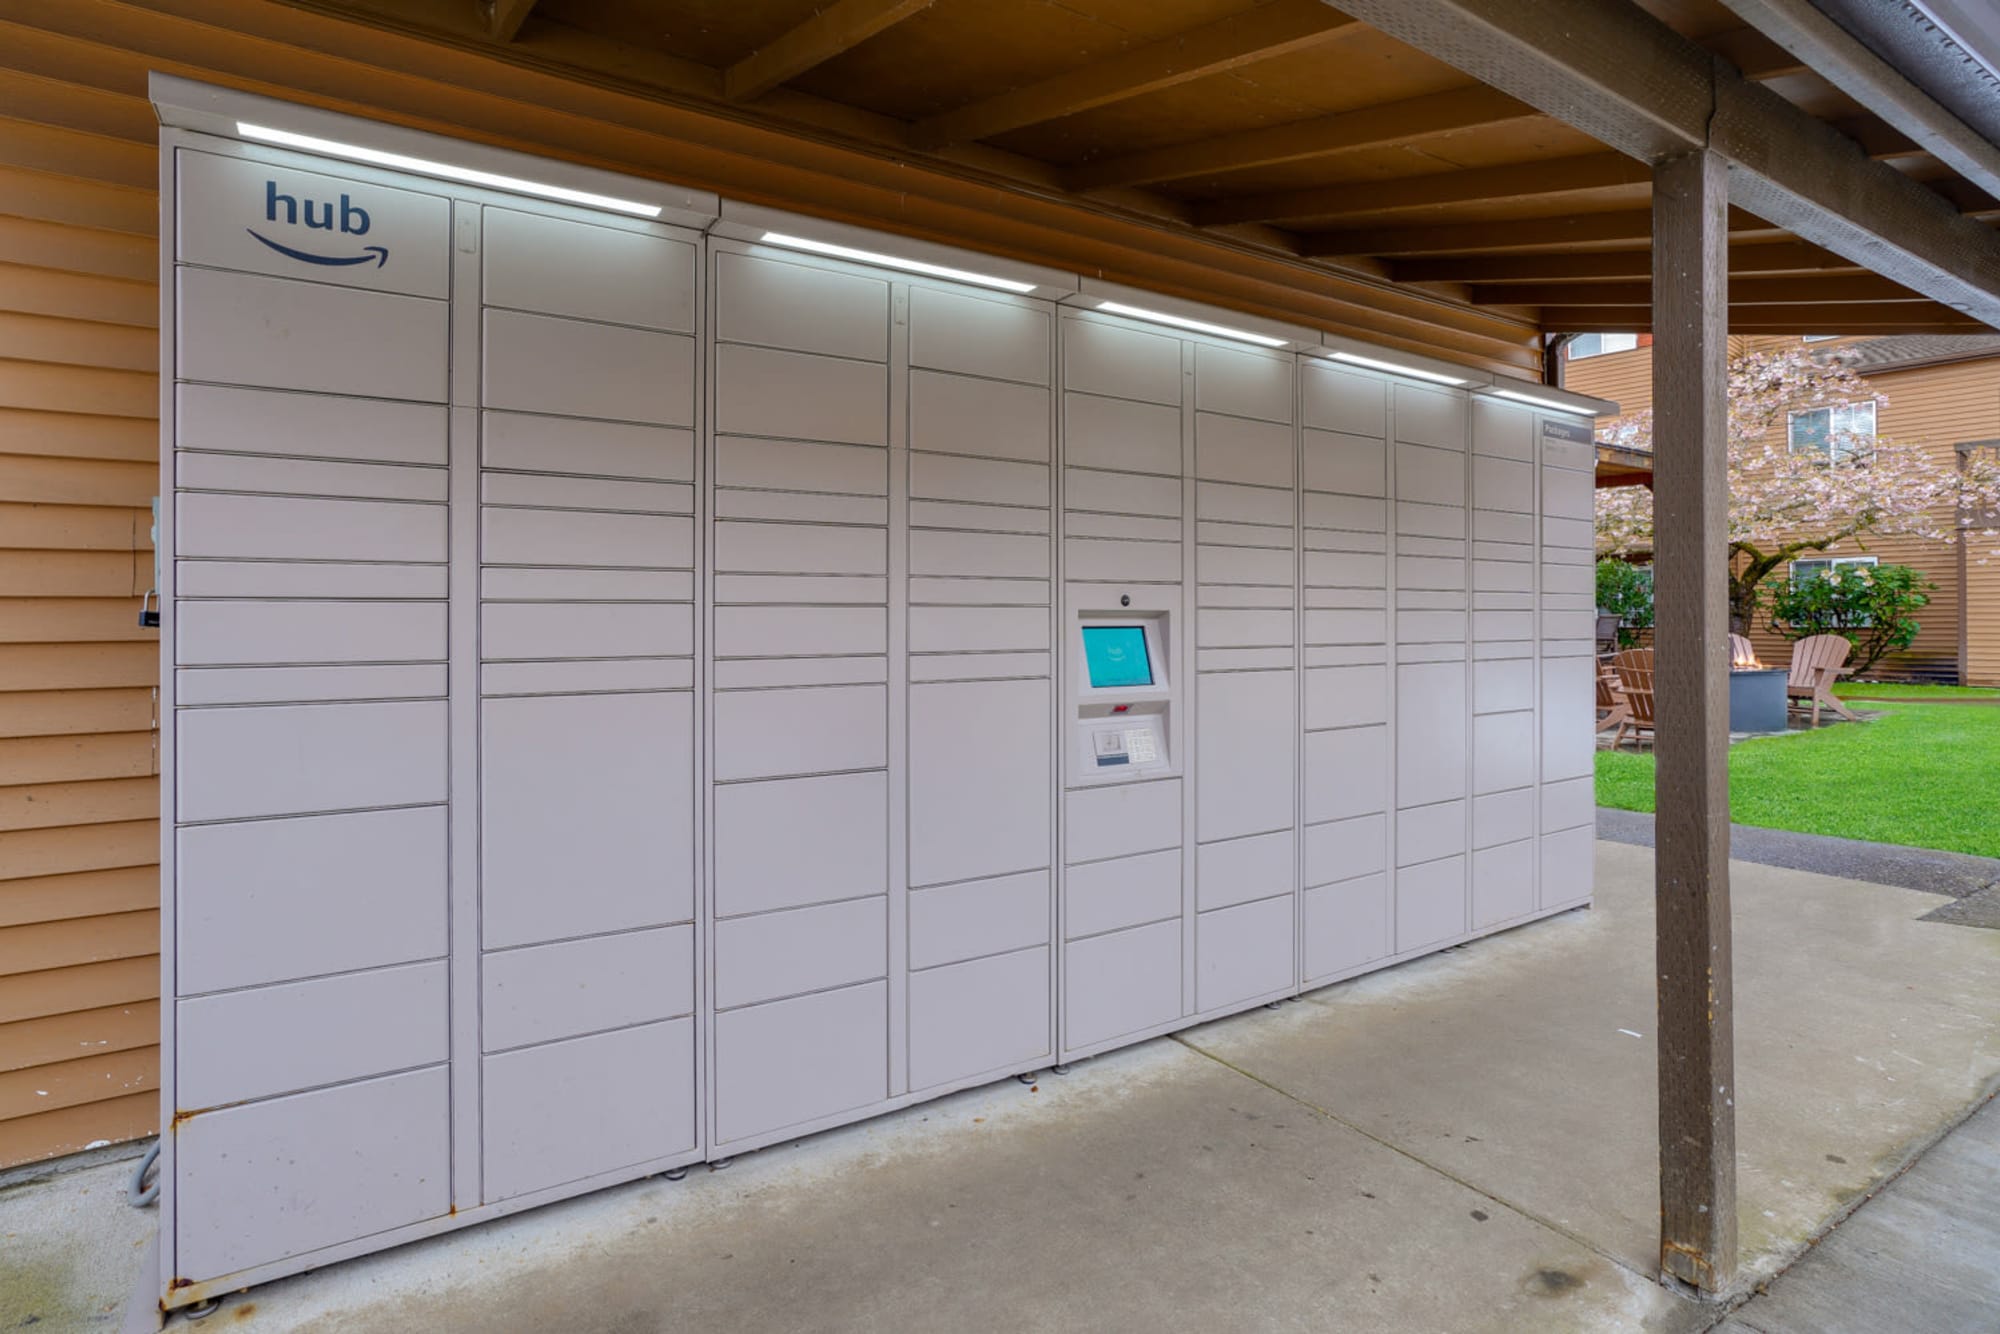 24-hour package lockers with Amazon HUB at Renaissance at 29th Apartments in Vancouver, Washington